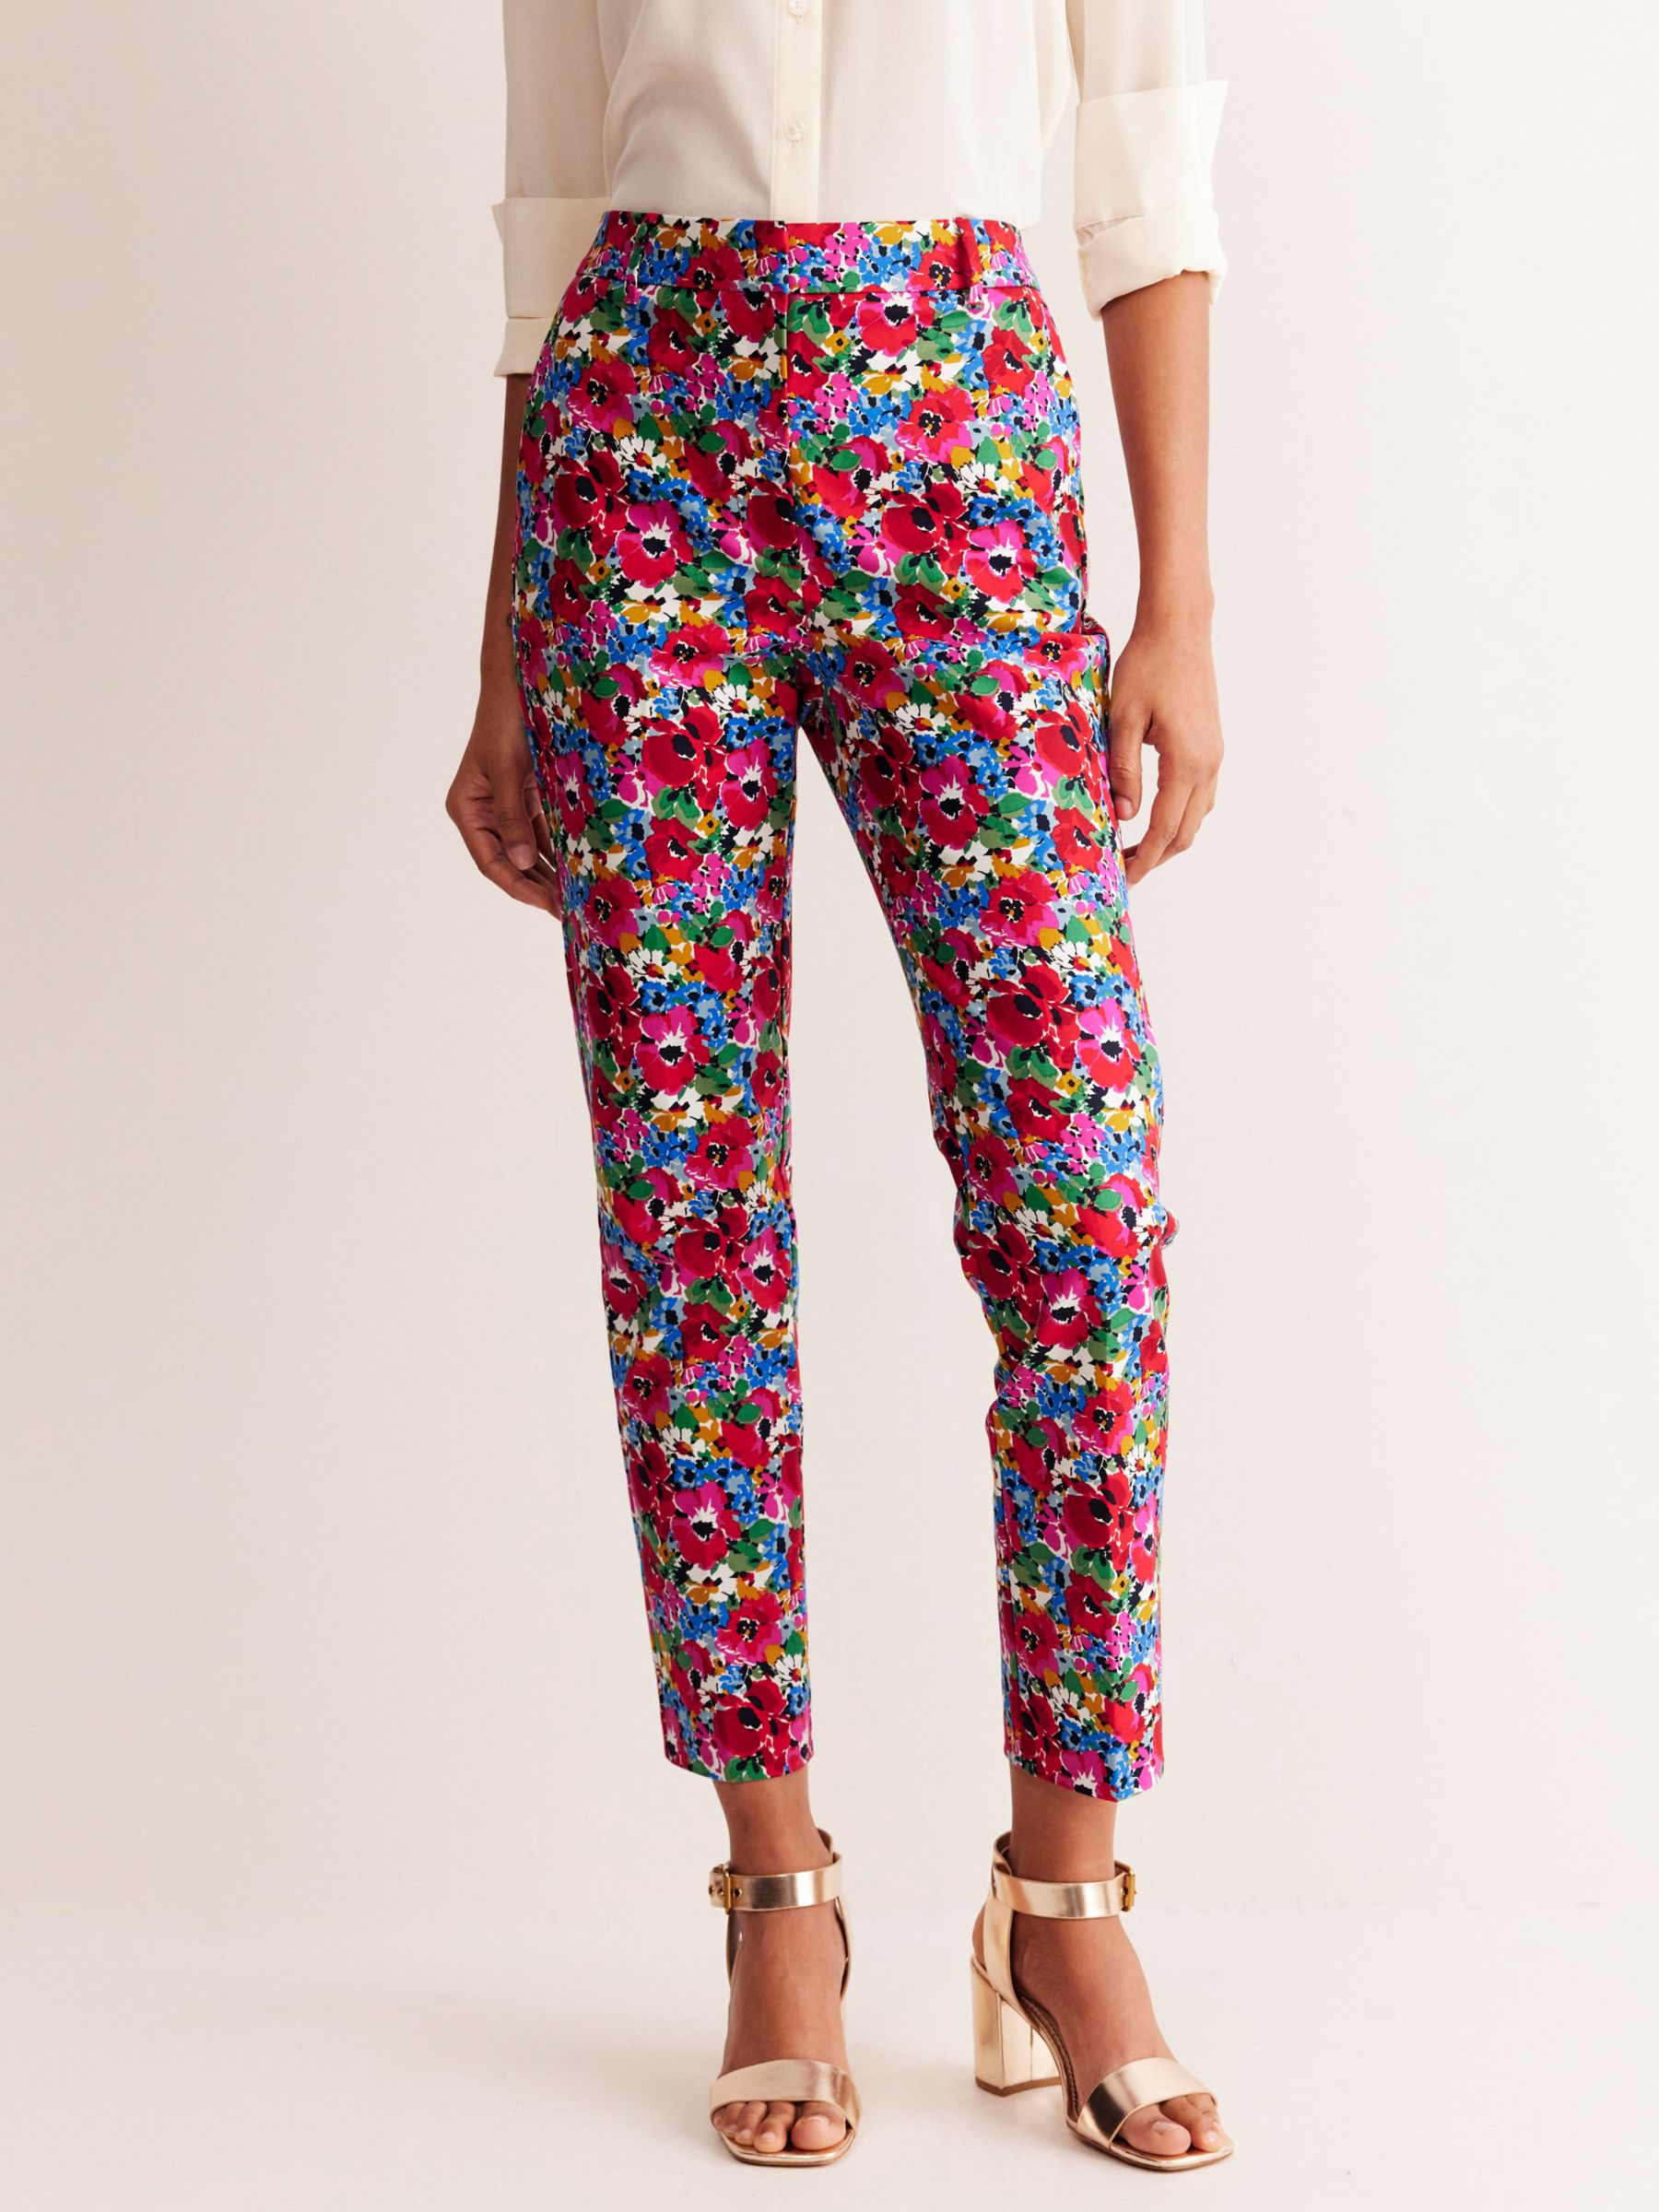 Boden Highgate Wild Poppy Sateen Floral Tailored Trousers, Multi, 8